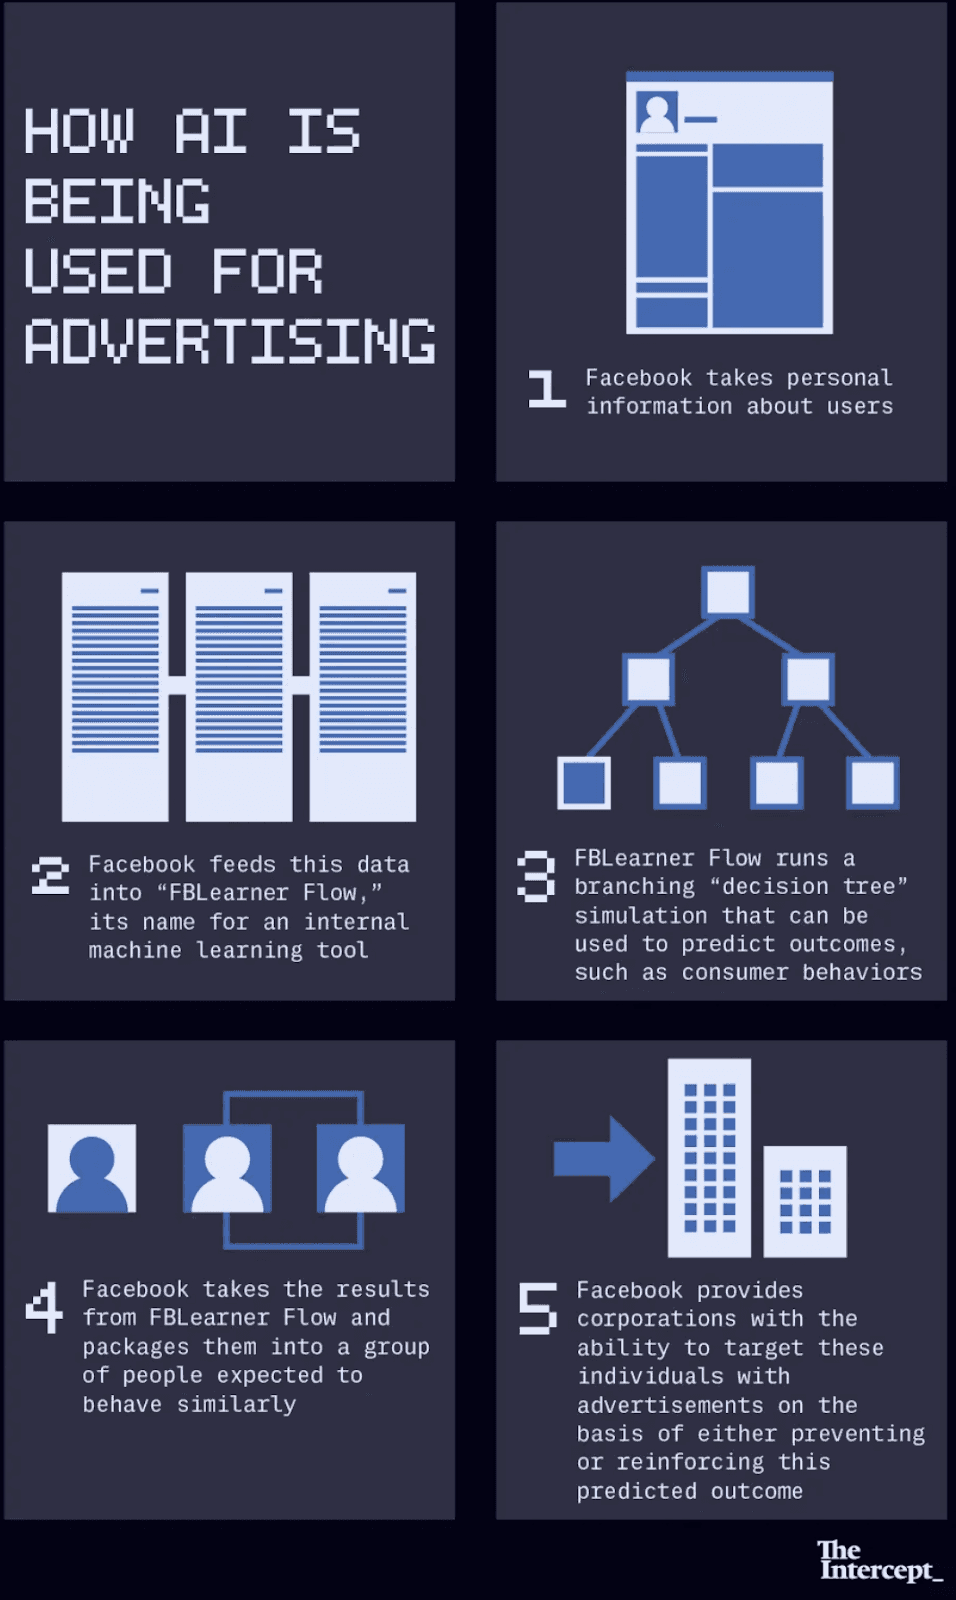 How AI is being used for Facebook advertising